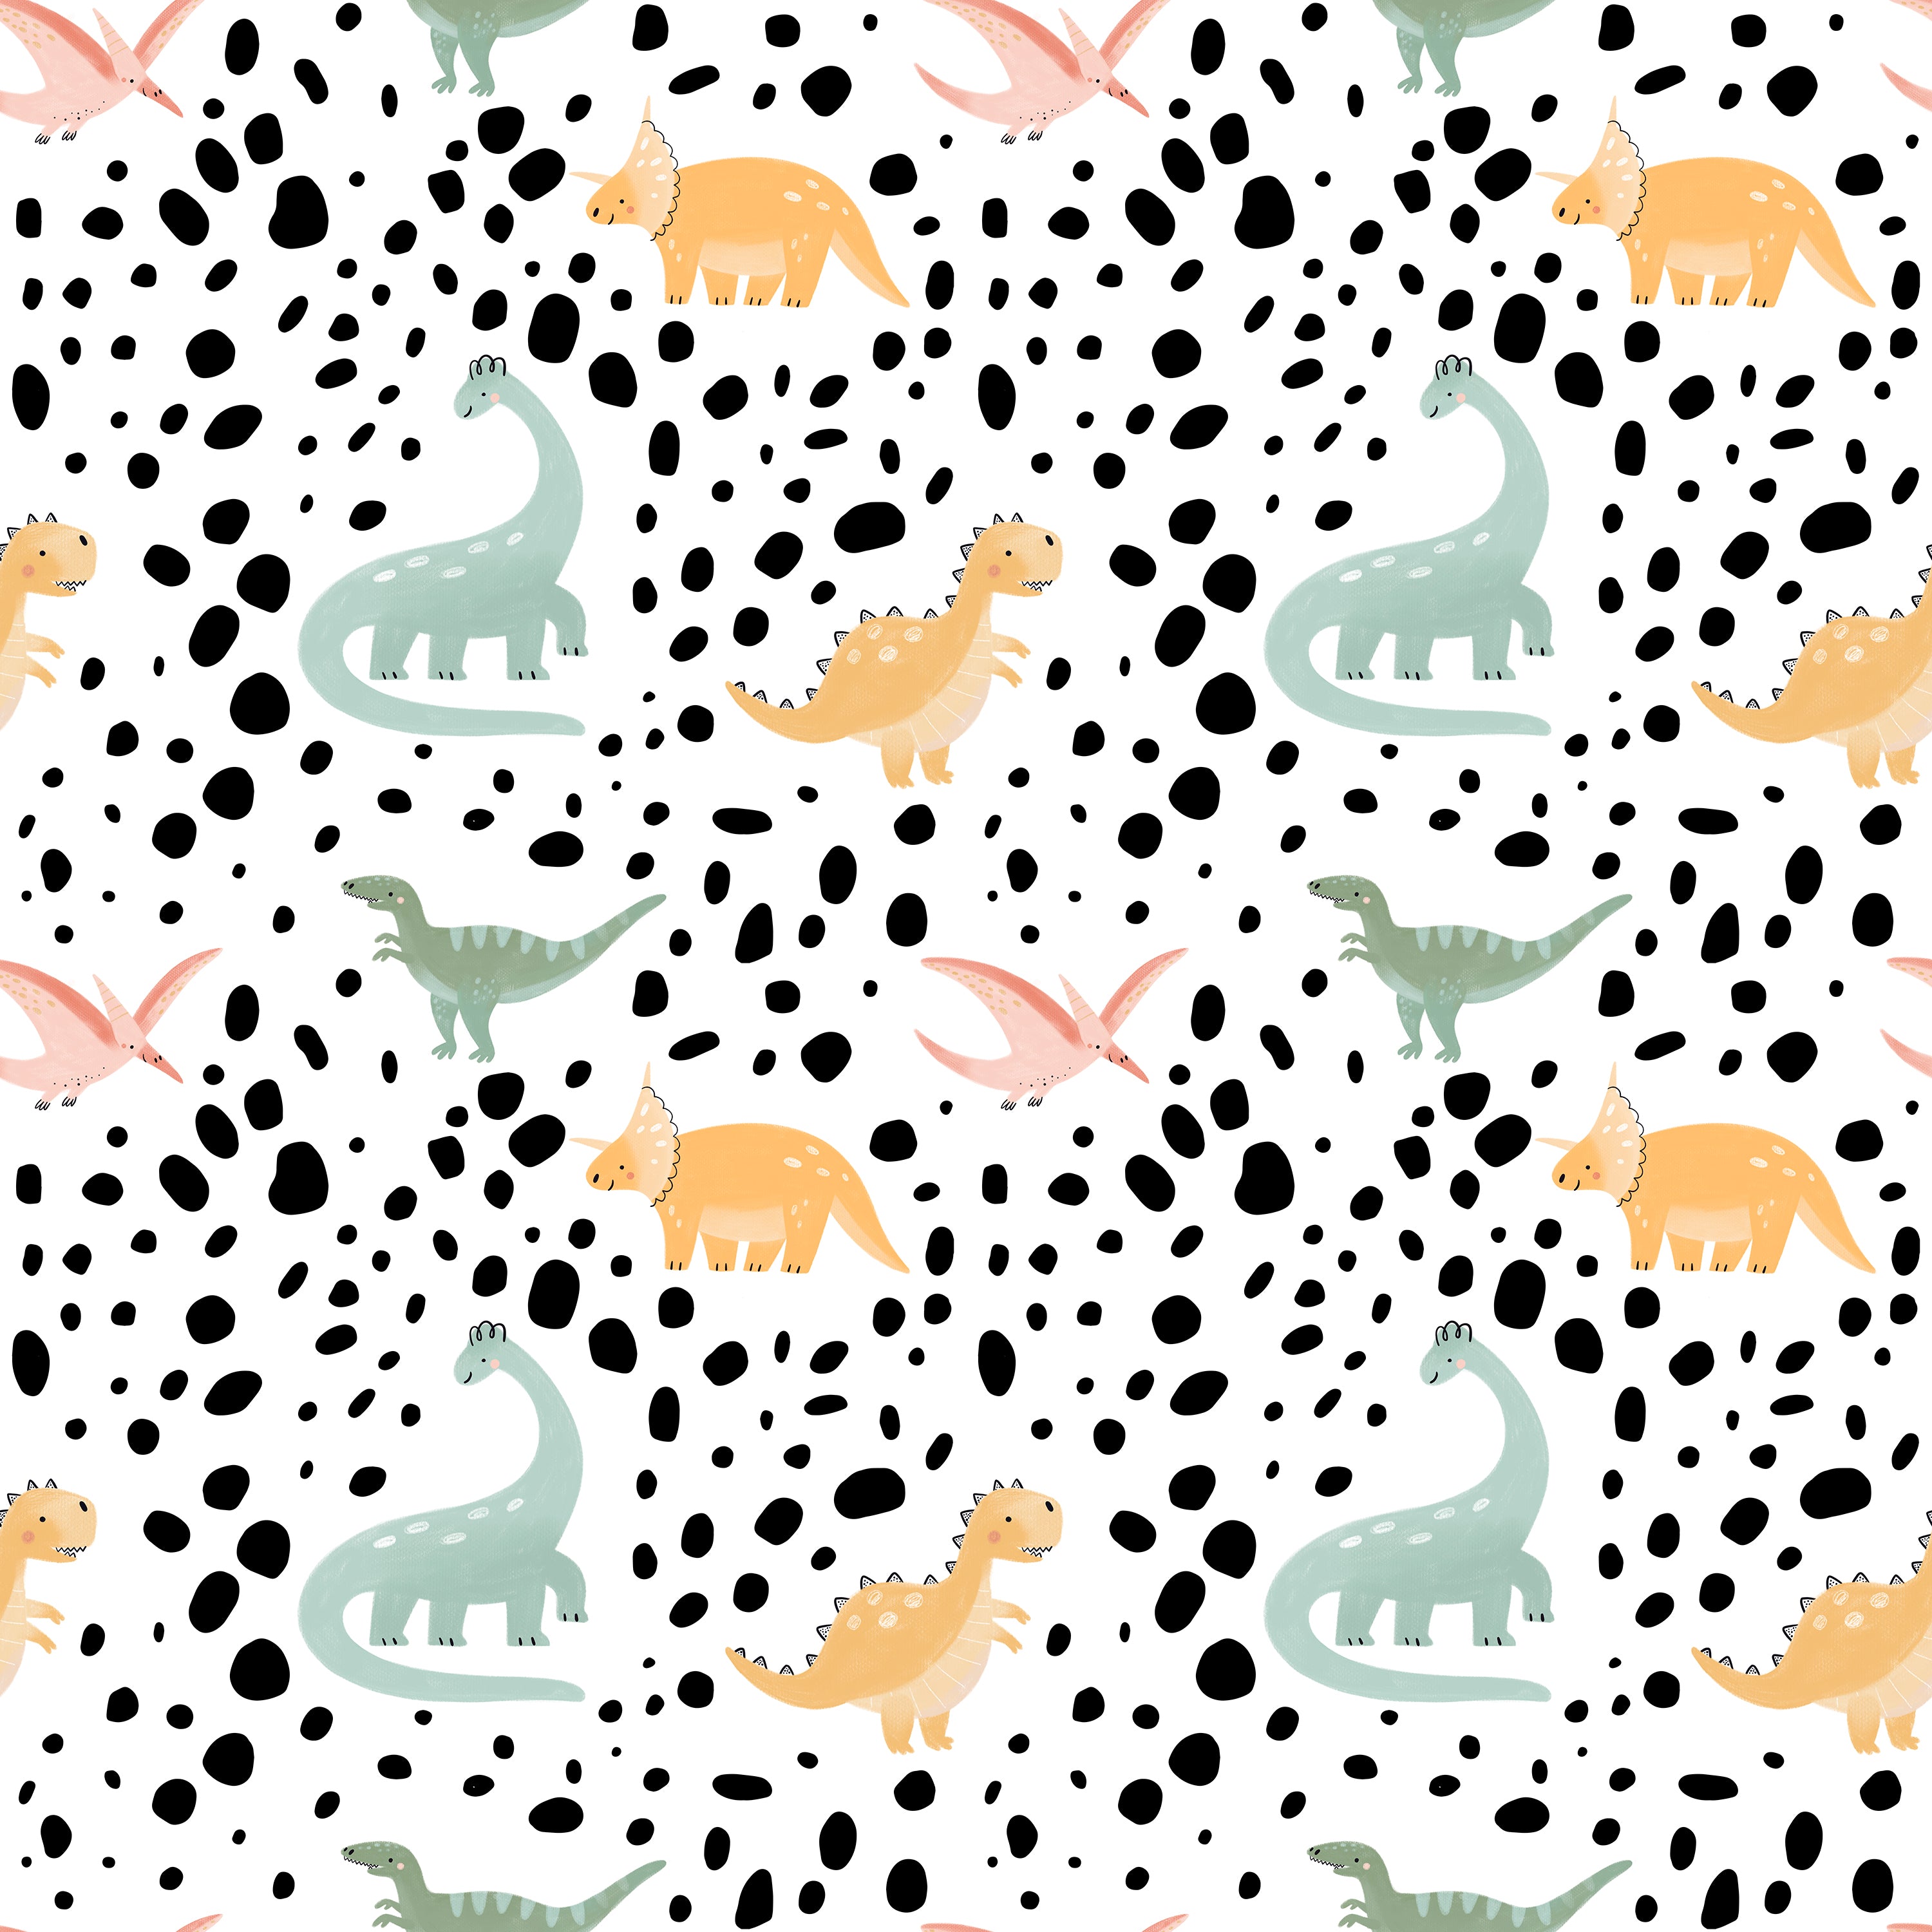 Close-up of Dino World Kids Wallpaper with dinosaurs and black speckles